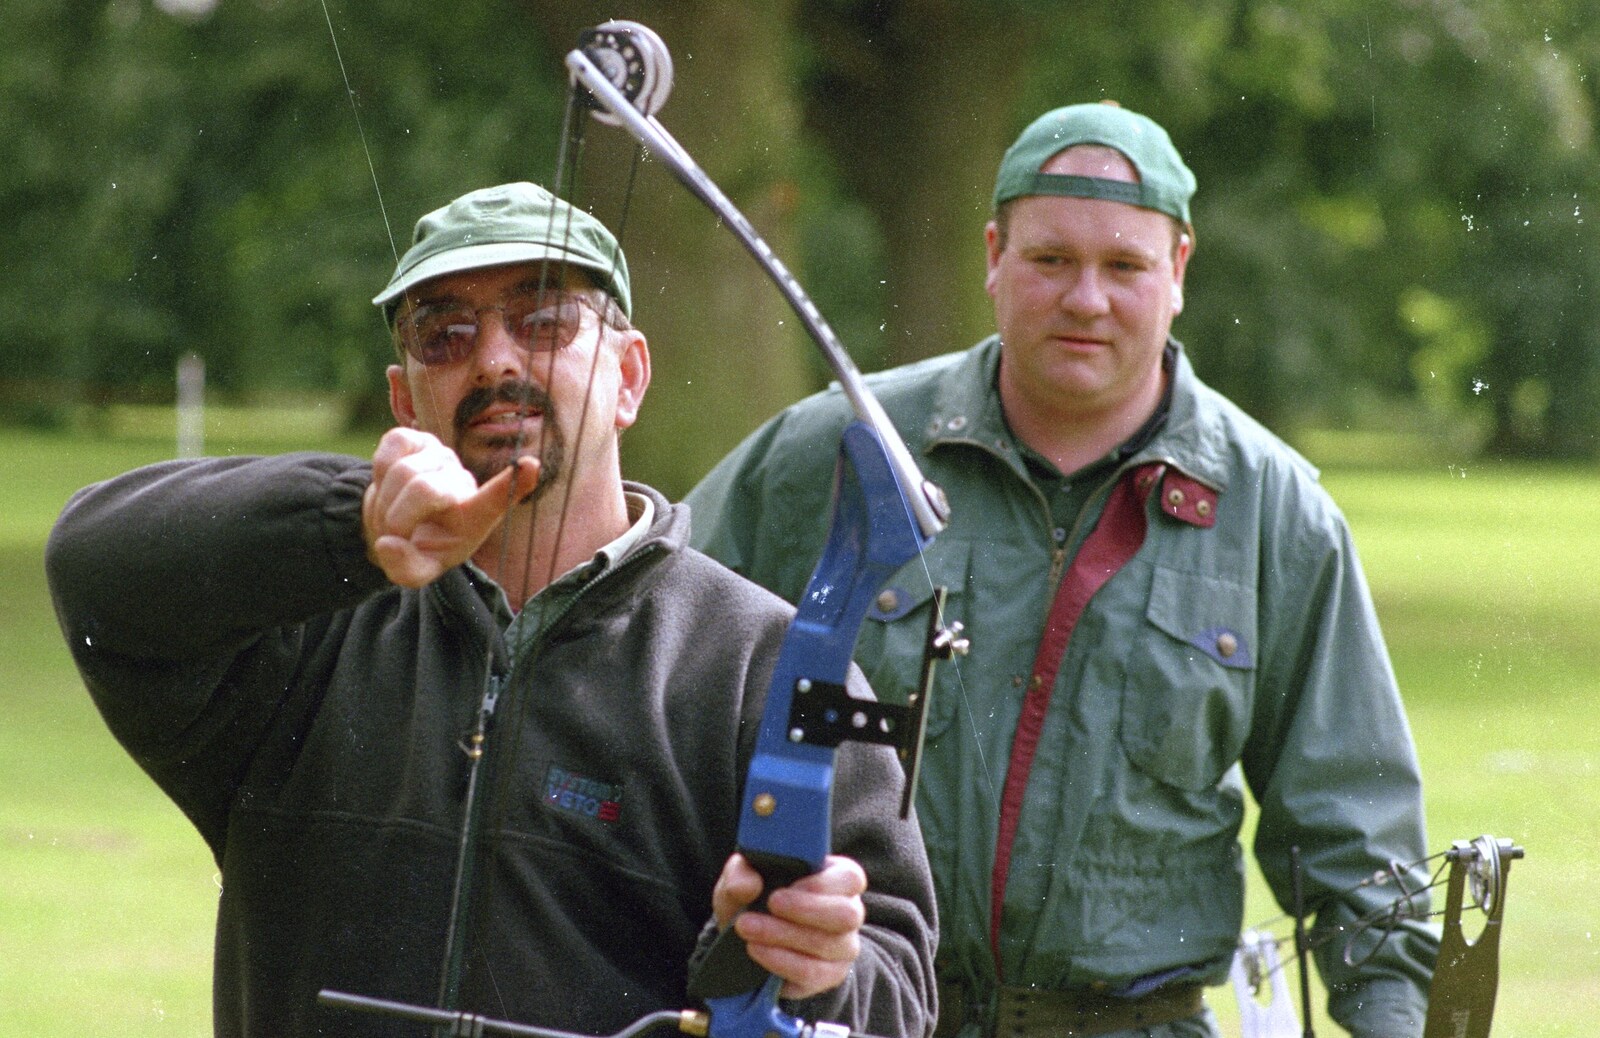 The archery instructors show us some stuff from Kai's 2nd and a Bit of Archery, Hampshire and Suffolk - 13th August 2000